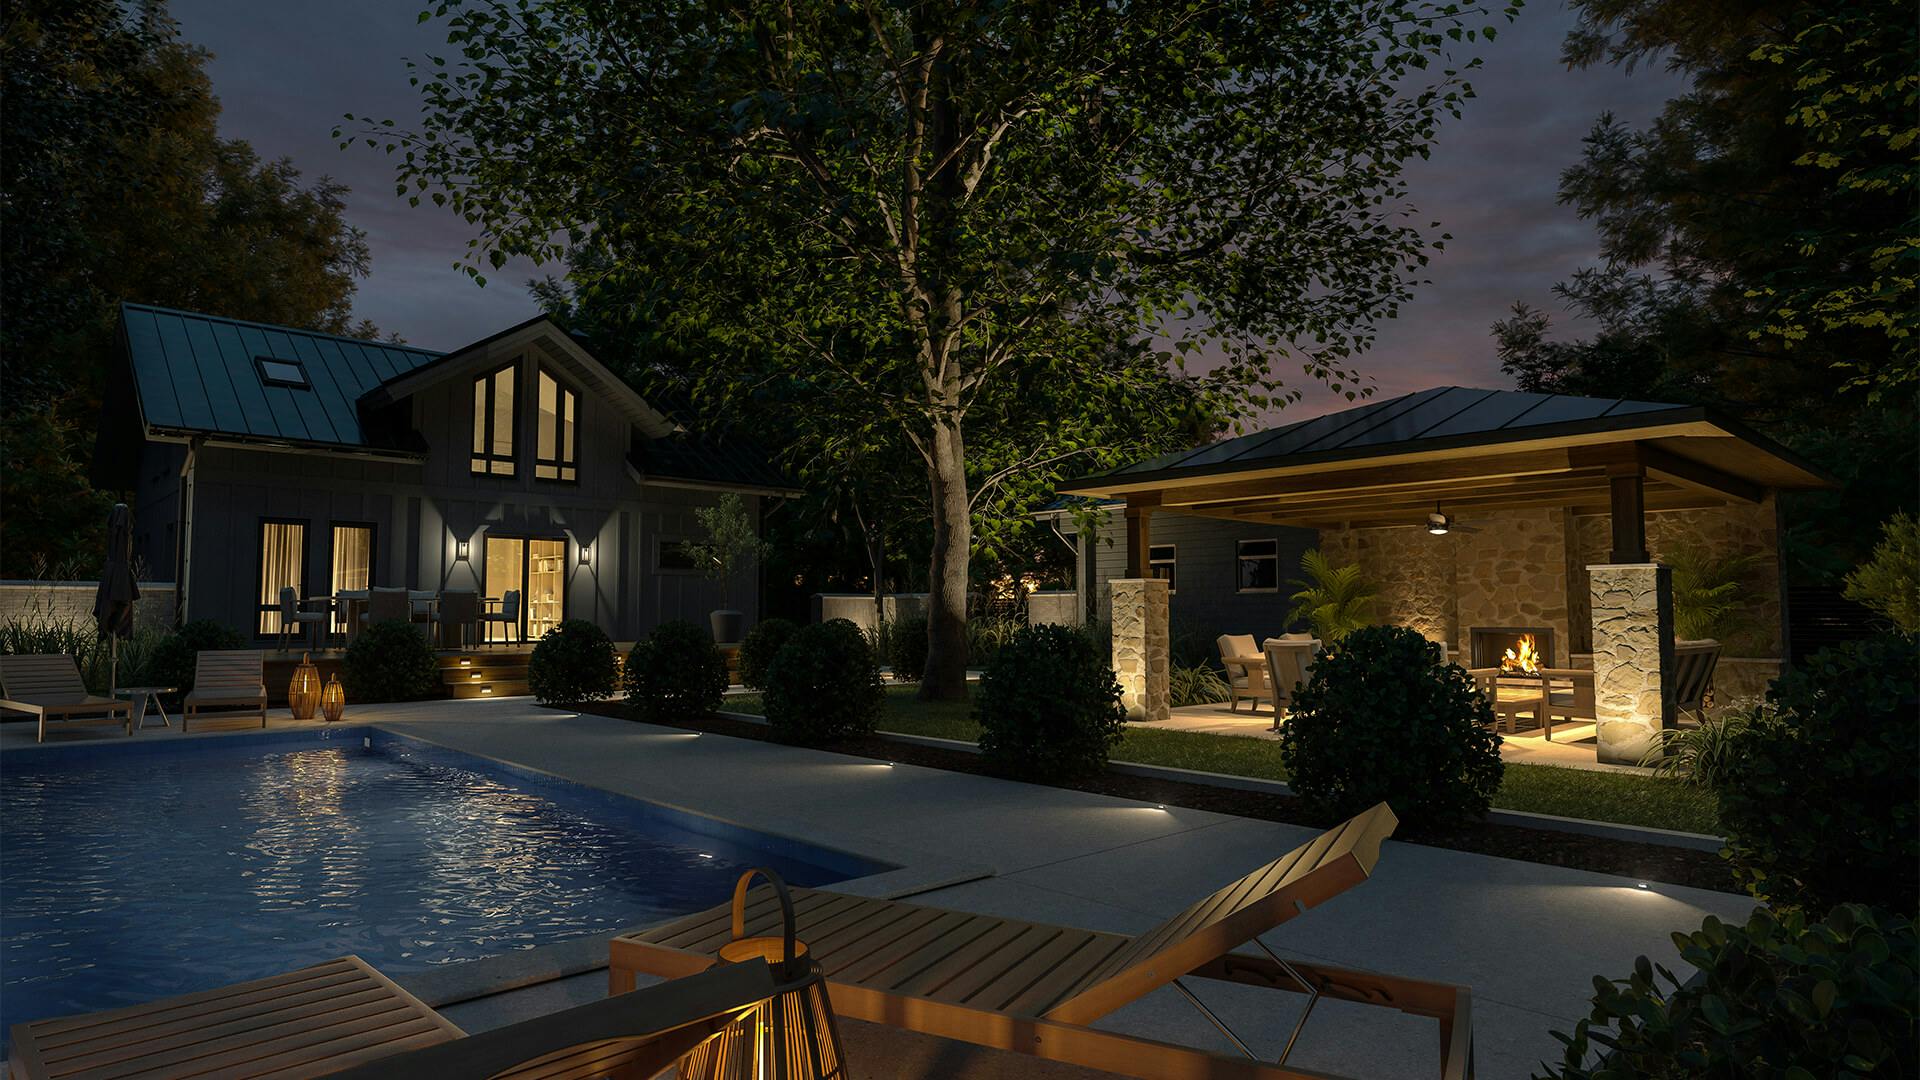 Exterior of stone home with pool and covered patio in the background with landscape accent lights